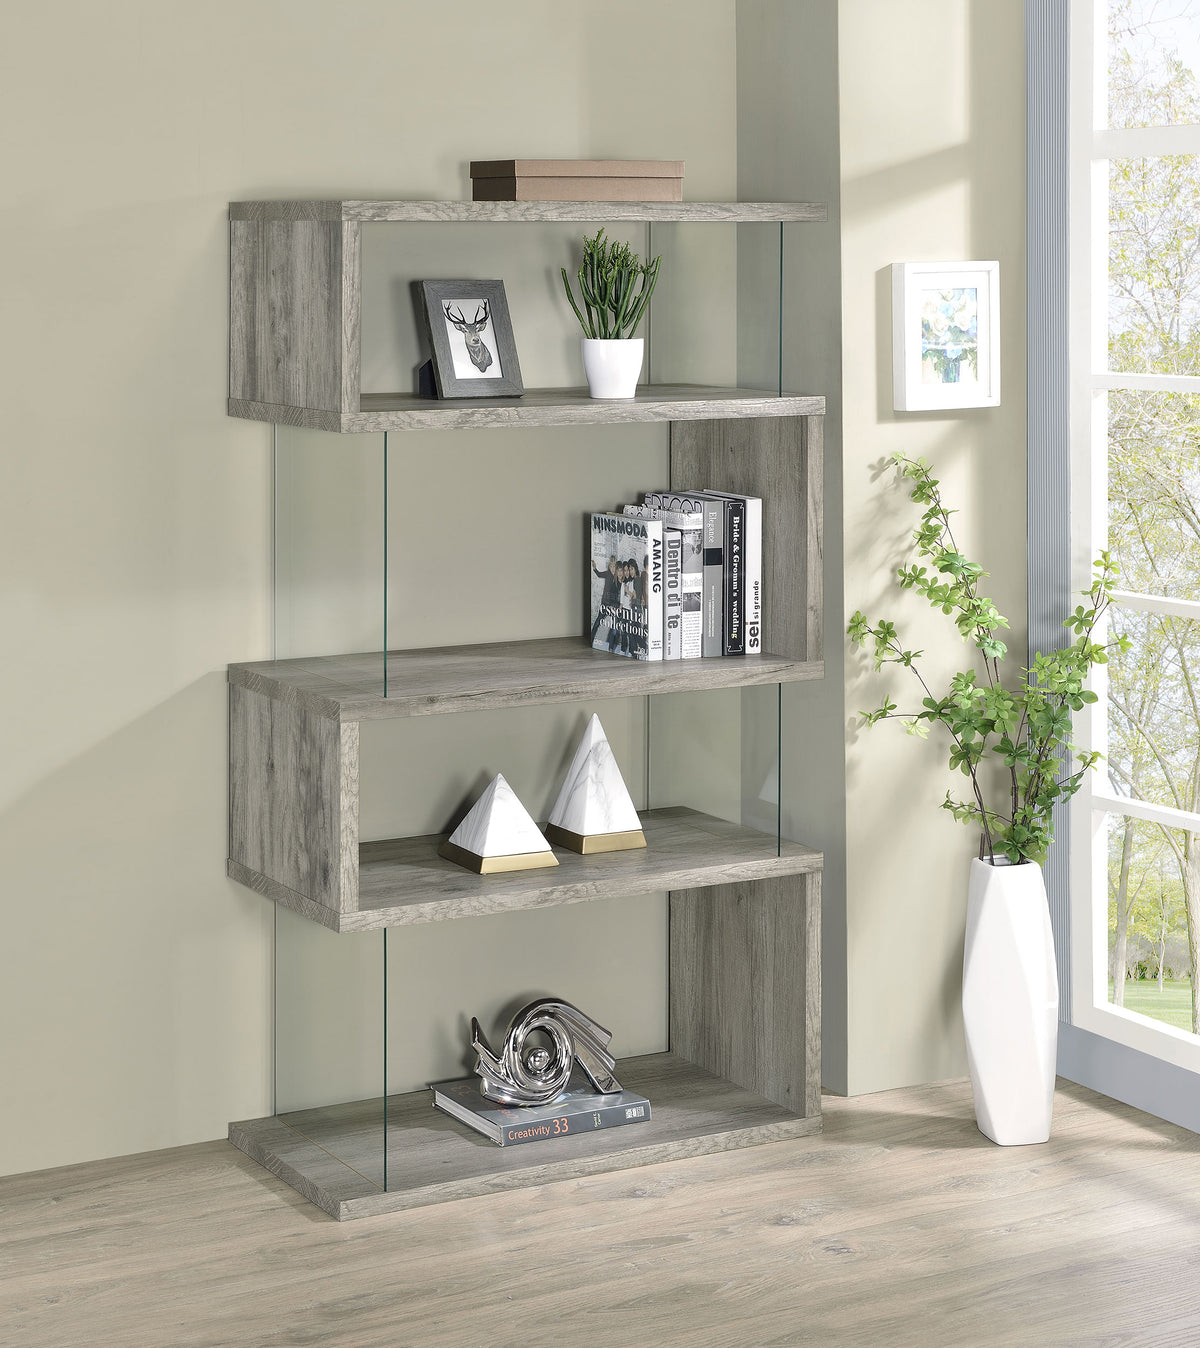 Emelle 4-shelf Bookcase with Glass Panels - Half Price Furniture